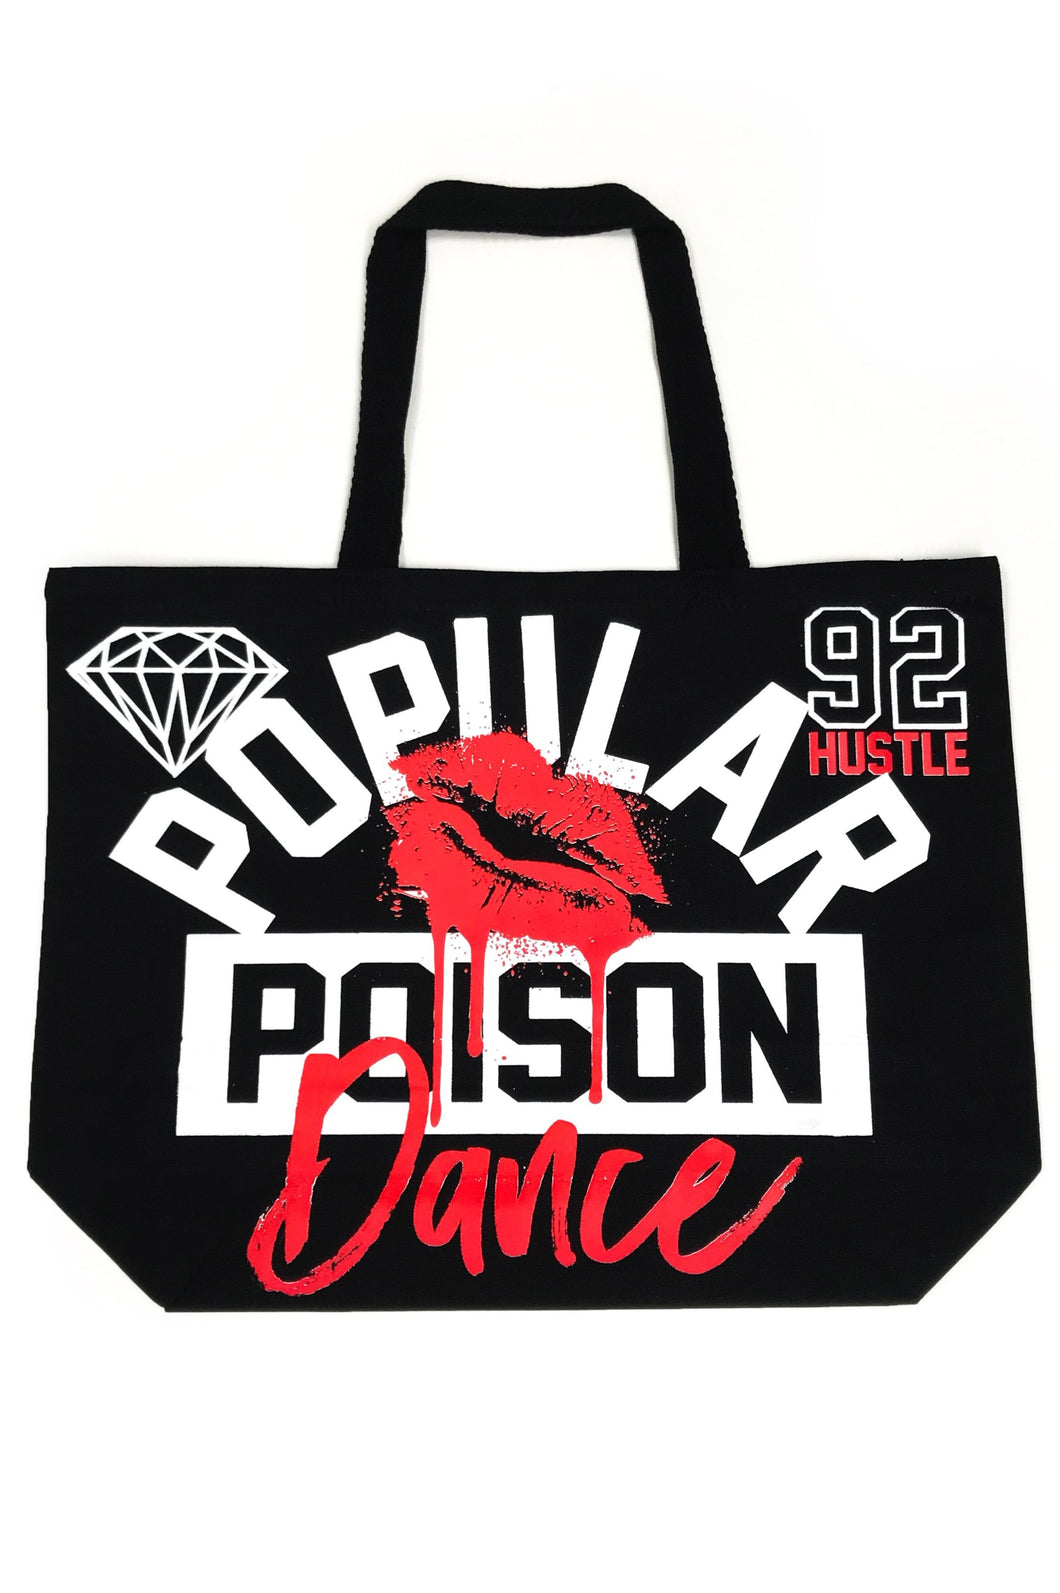 Two-sided Popular Poisons Graphic Tote Bag